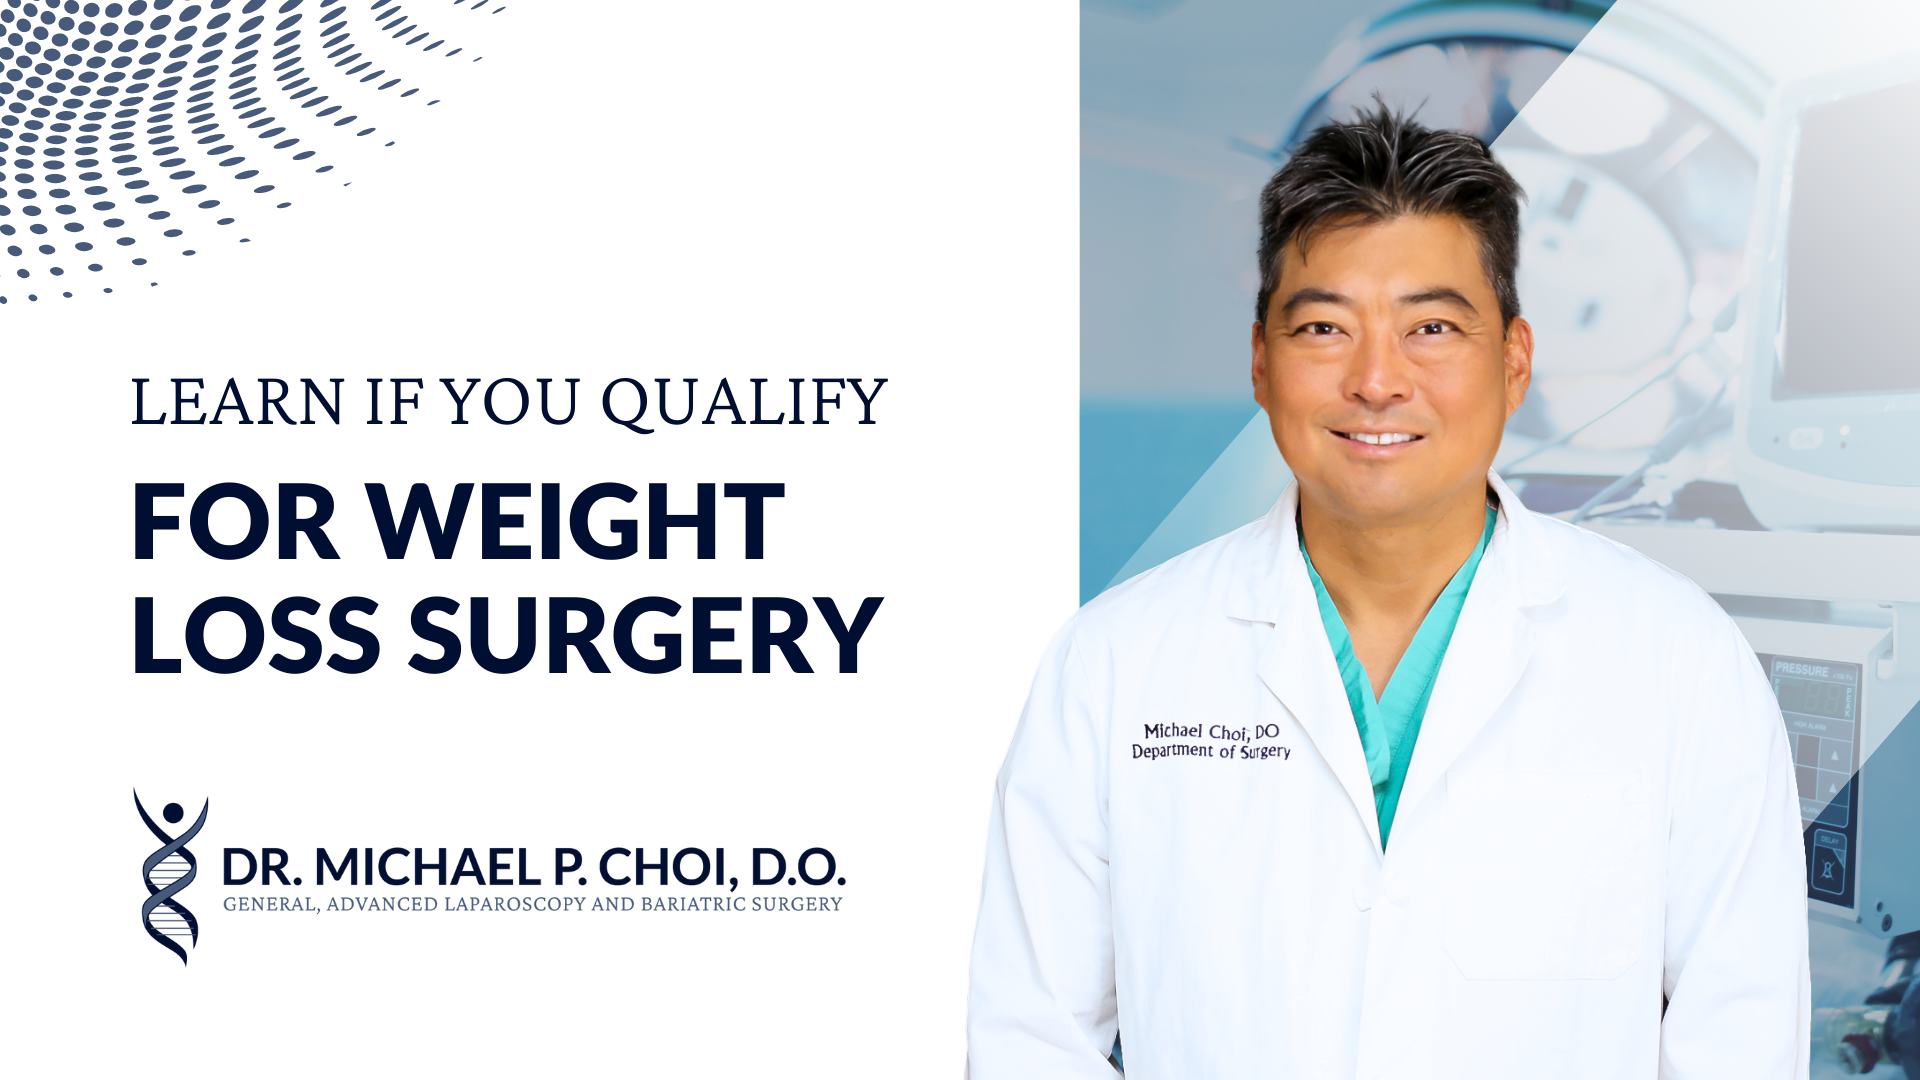 LEARN IF YOU QUALIFY FOR WEIGHT LOSS SURGERY